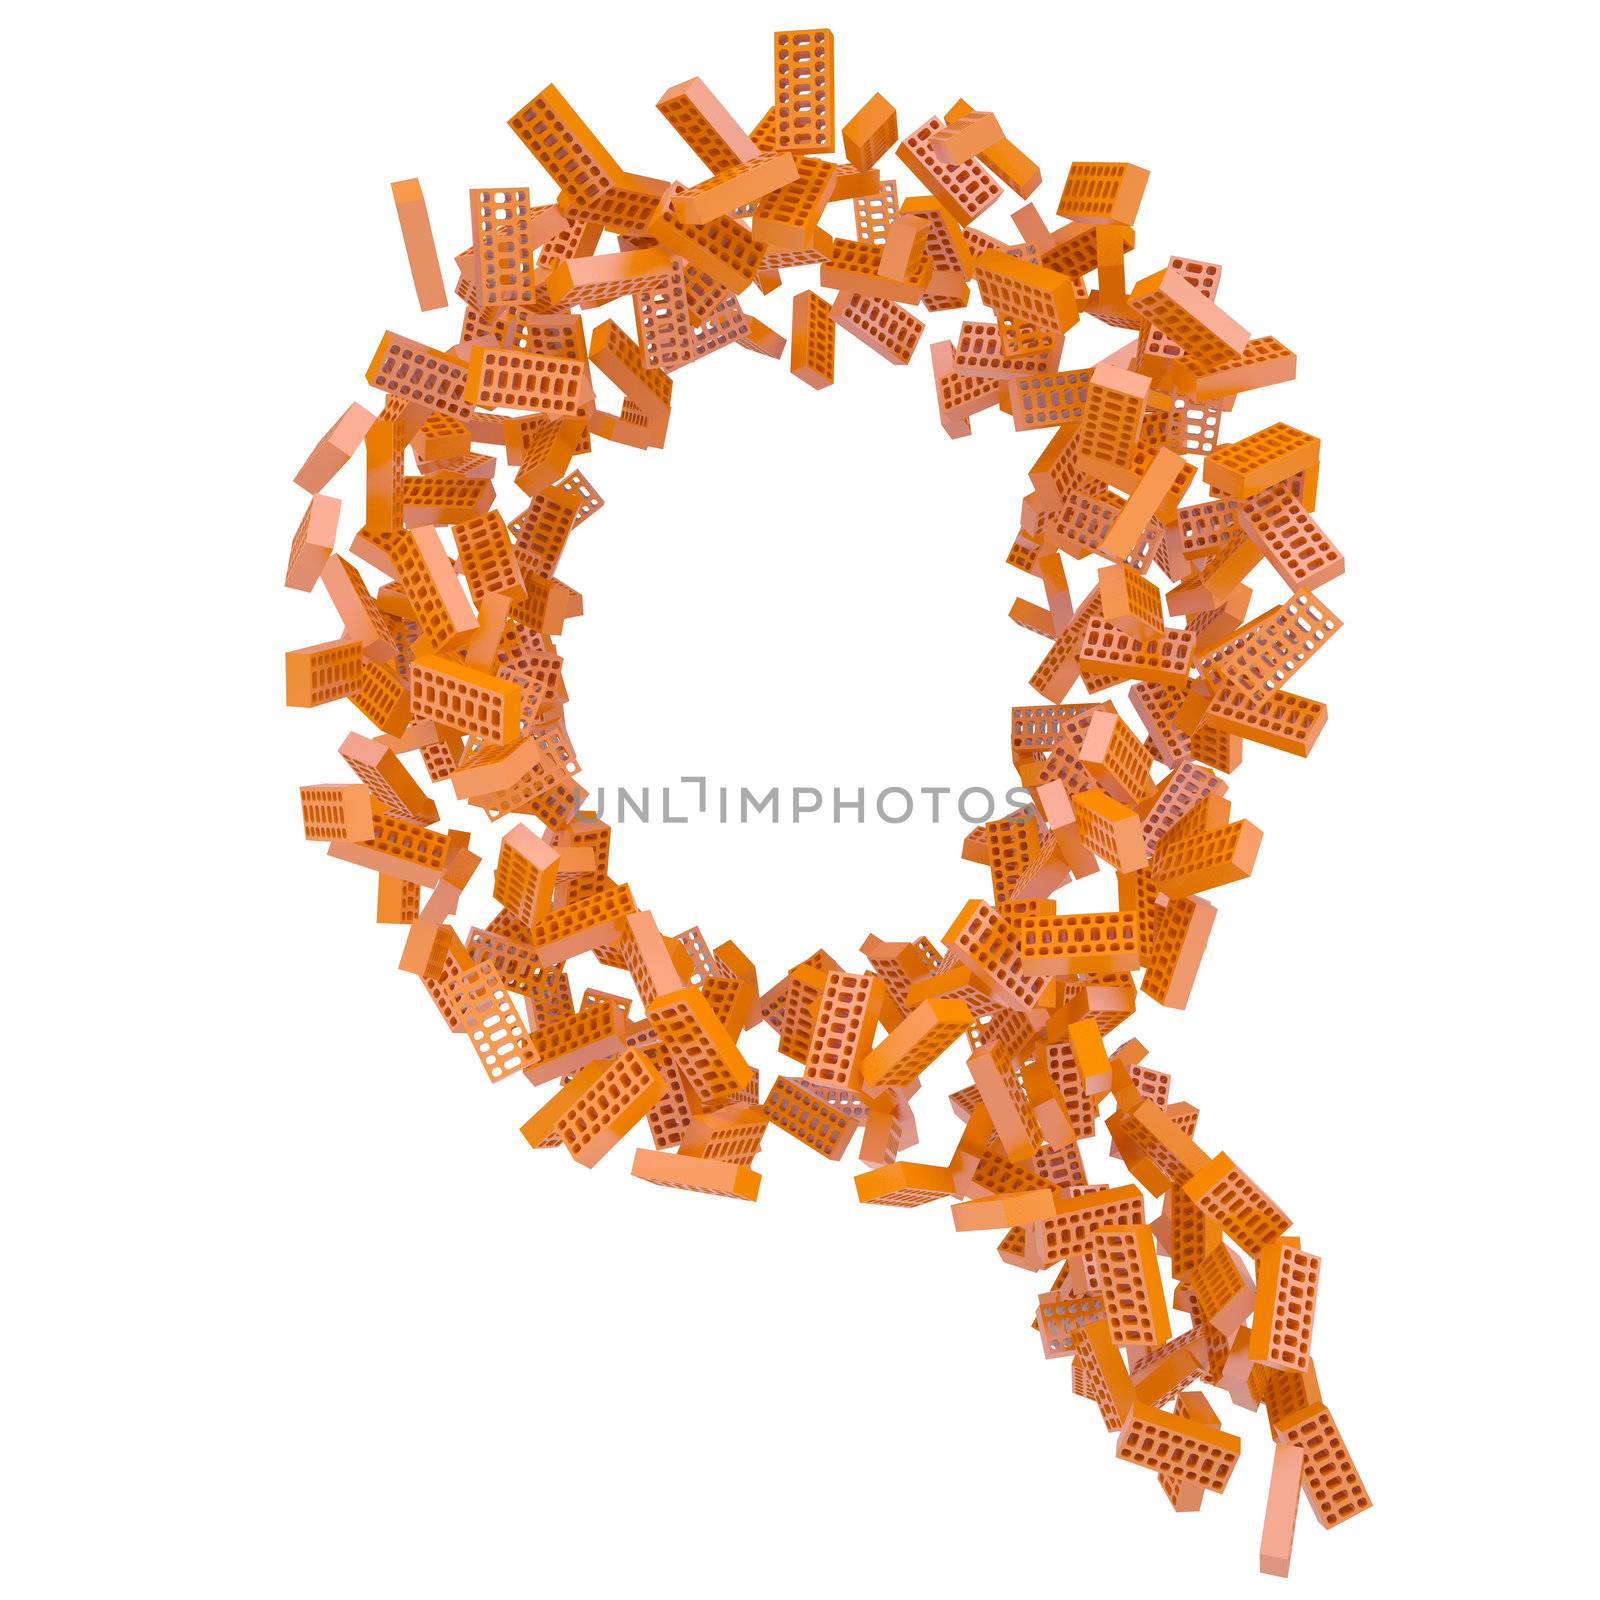 The letter is made up of bricks. Isolated render on a white background